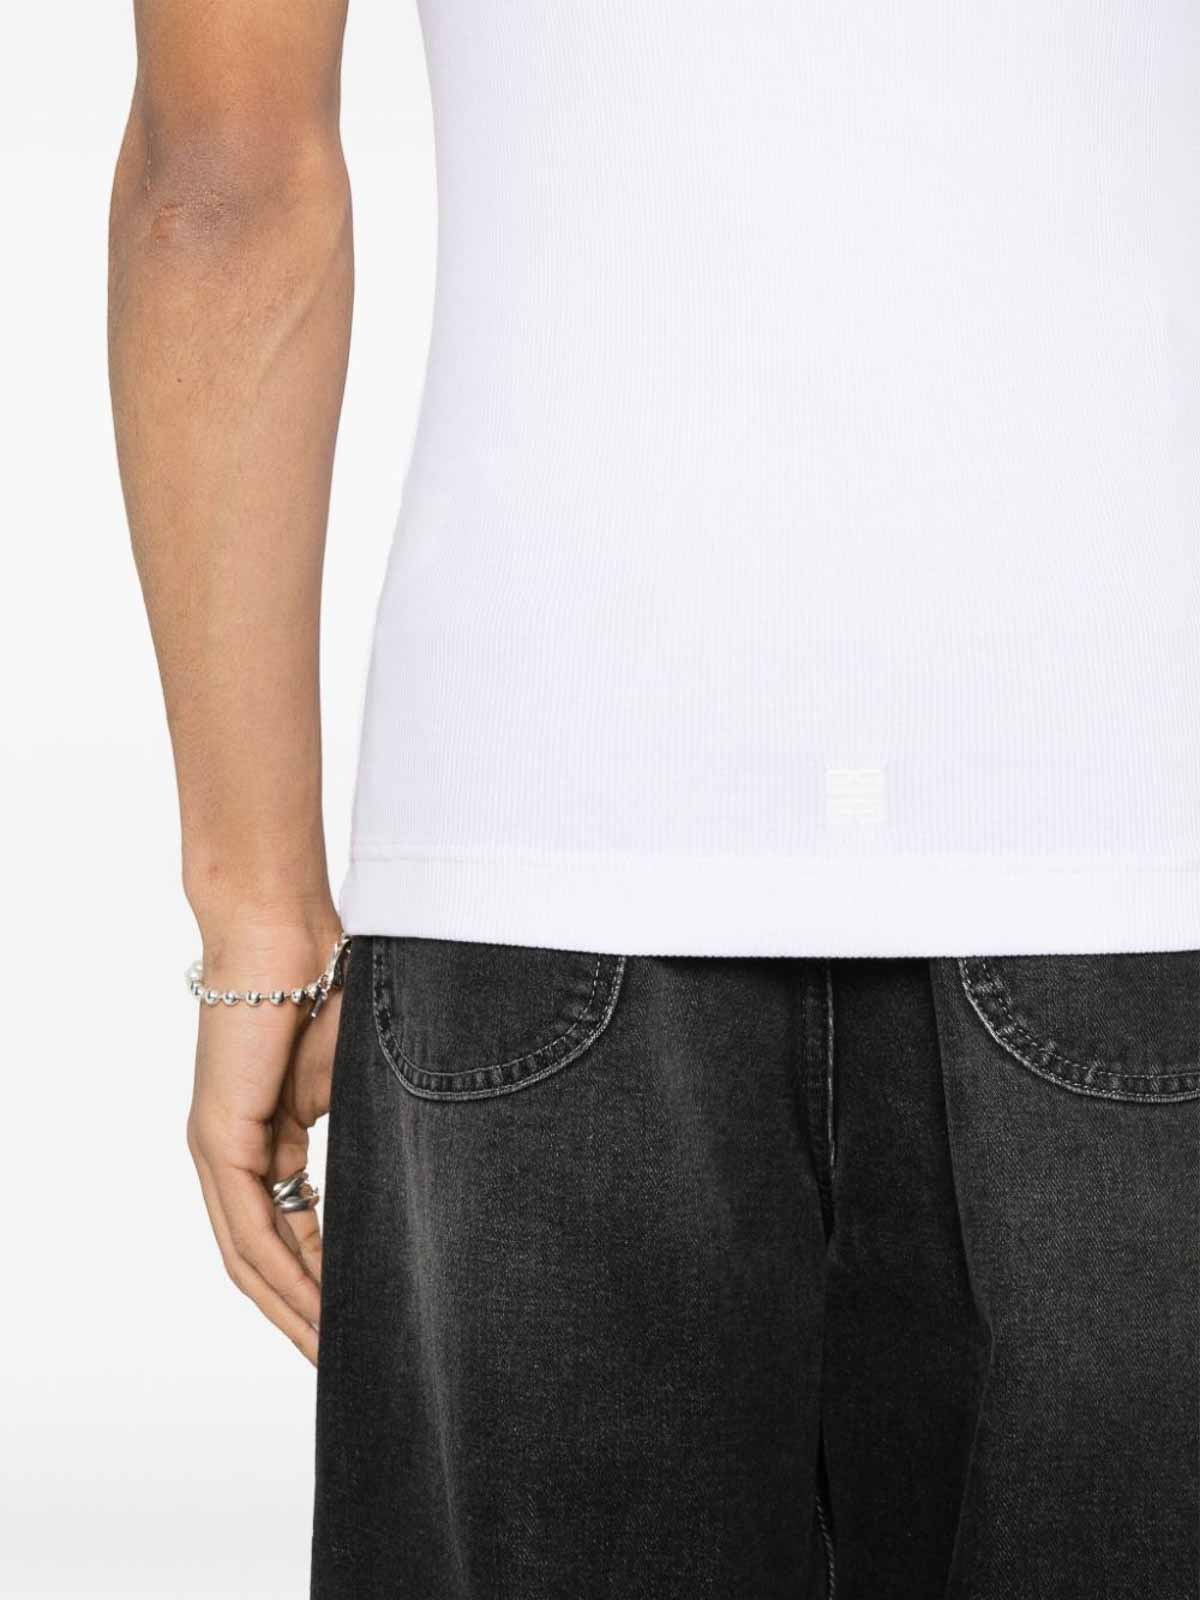 Shop Givenchy Extra Slim Fit Tank Top In White